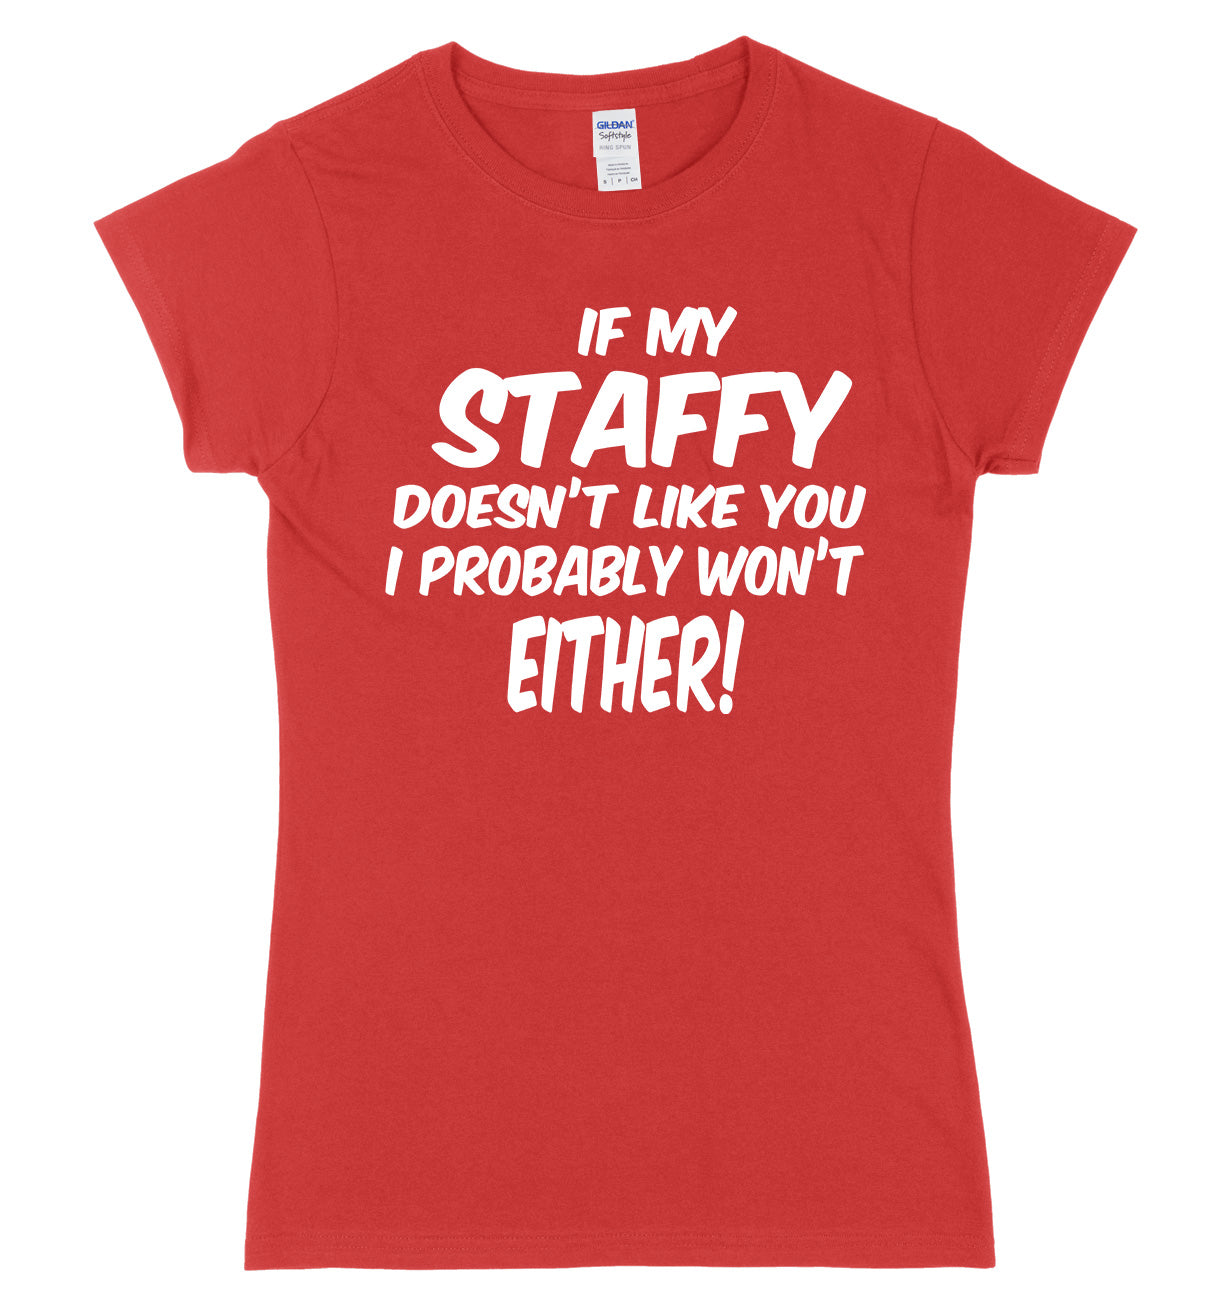 IF MY STAFFY DOESN'T LIKE YOU I PROBABLY WON'T EITHER FUNNY WOMENS LADIES SLIM FIT  T-SHIRT